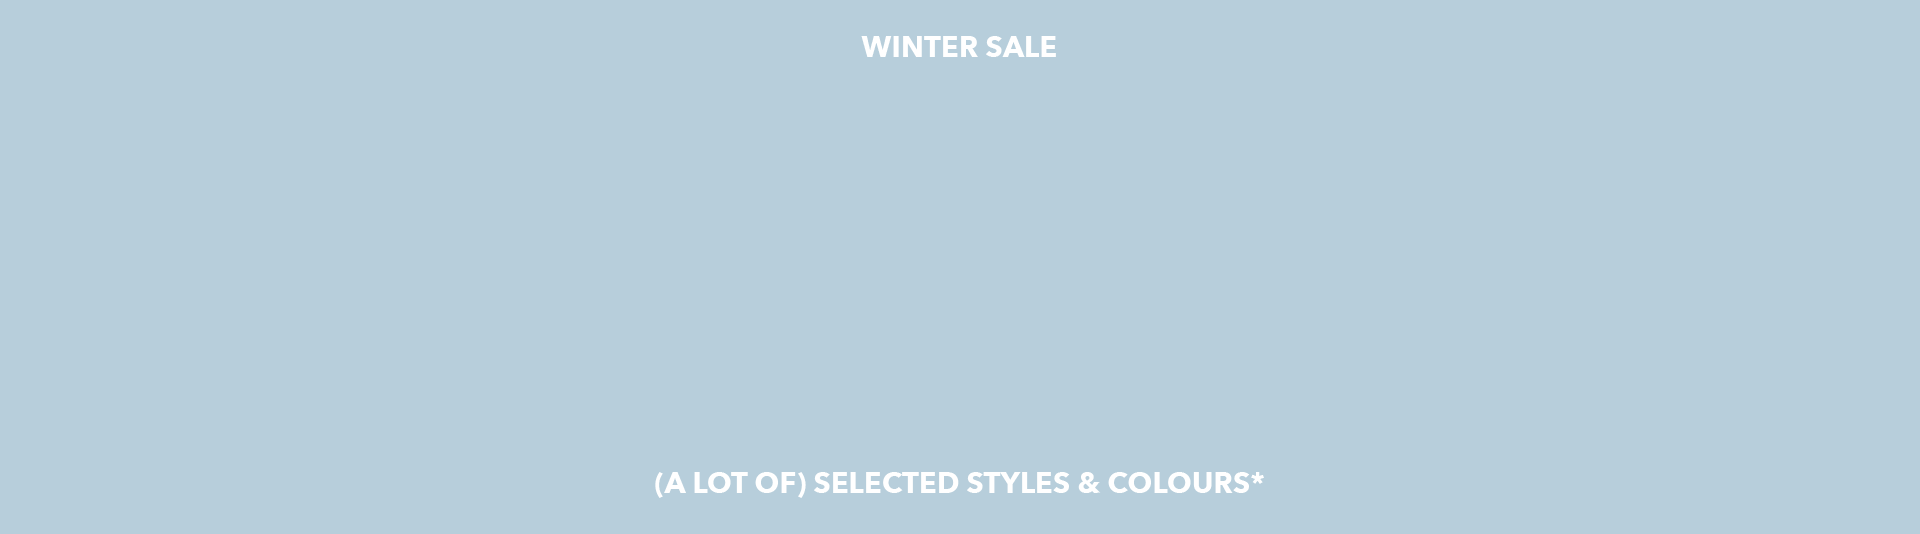 winter sale, up to 50% off selected styles & colours